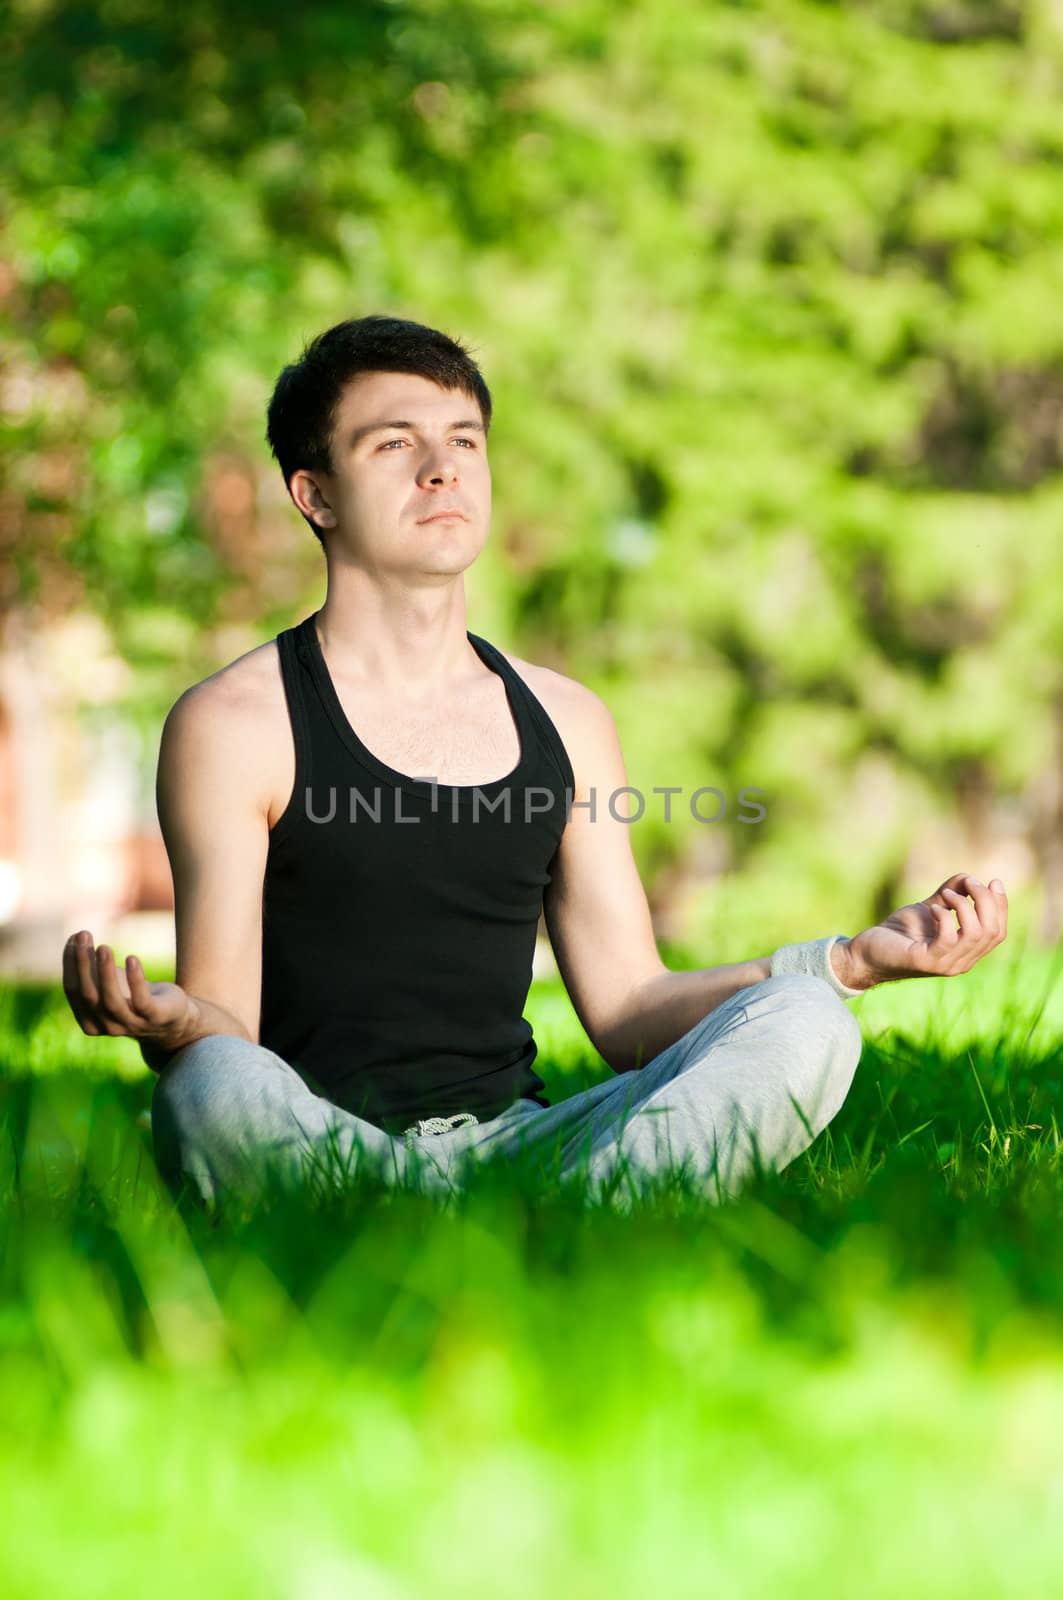 A young man doing yoga exercise by markin